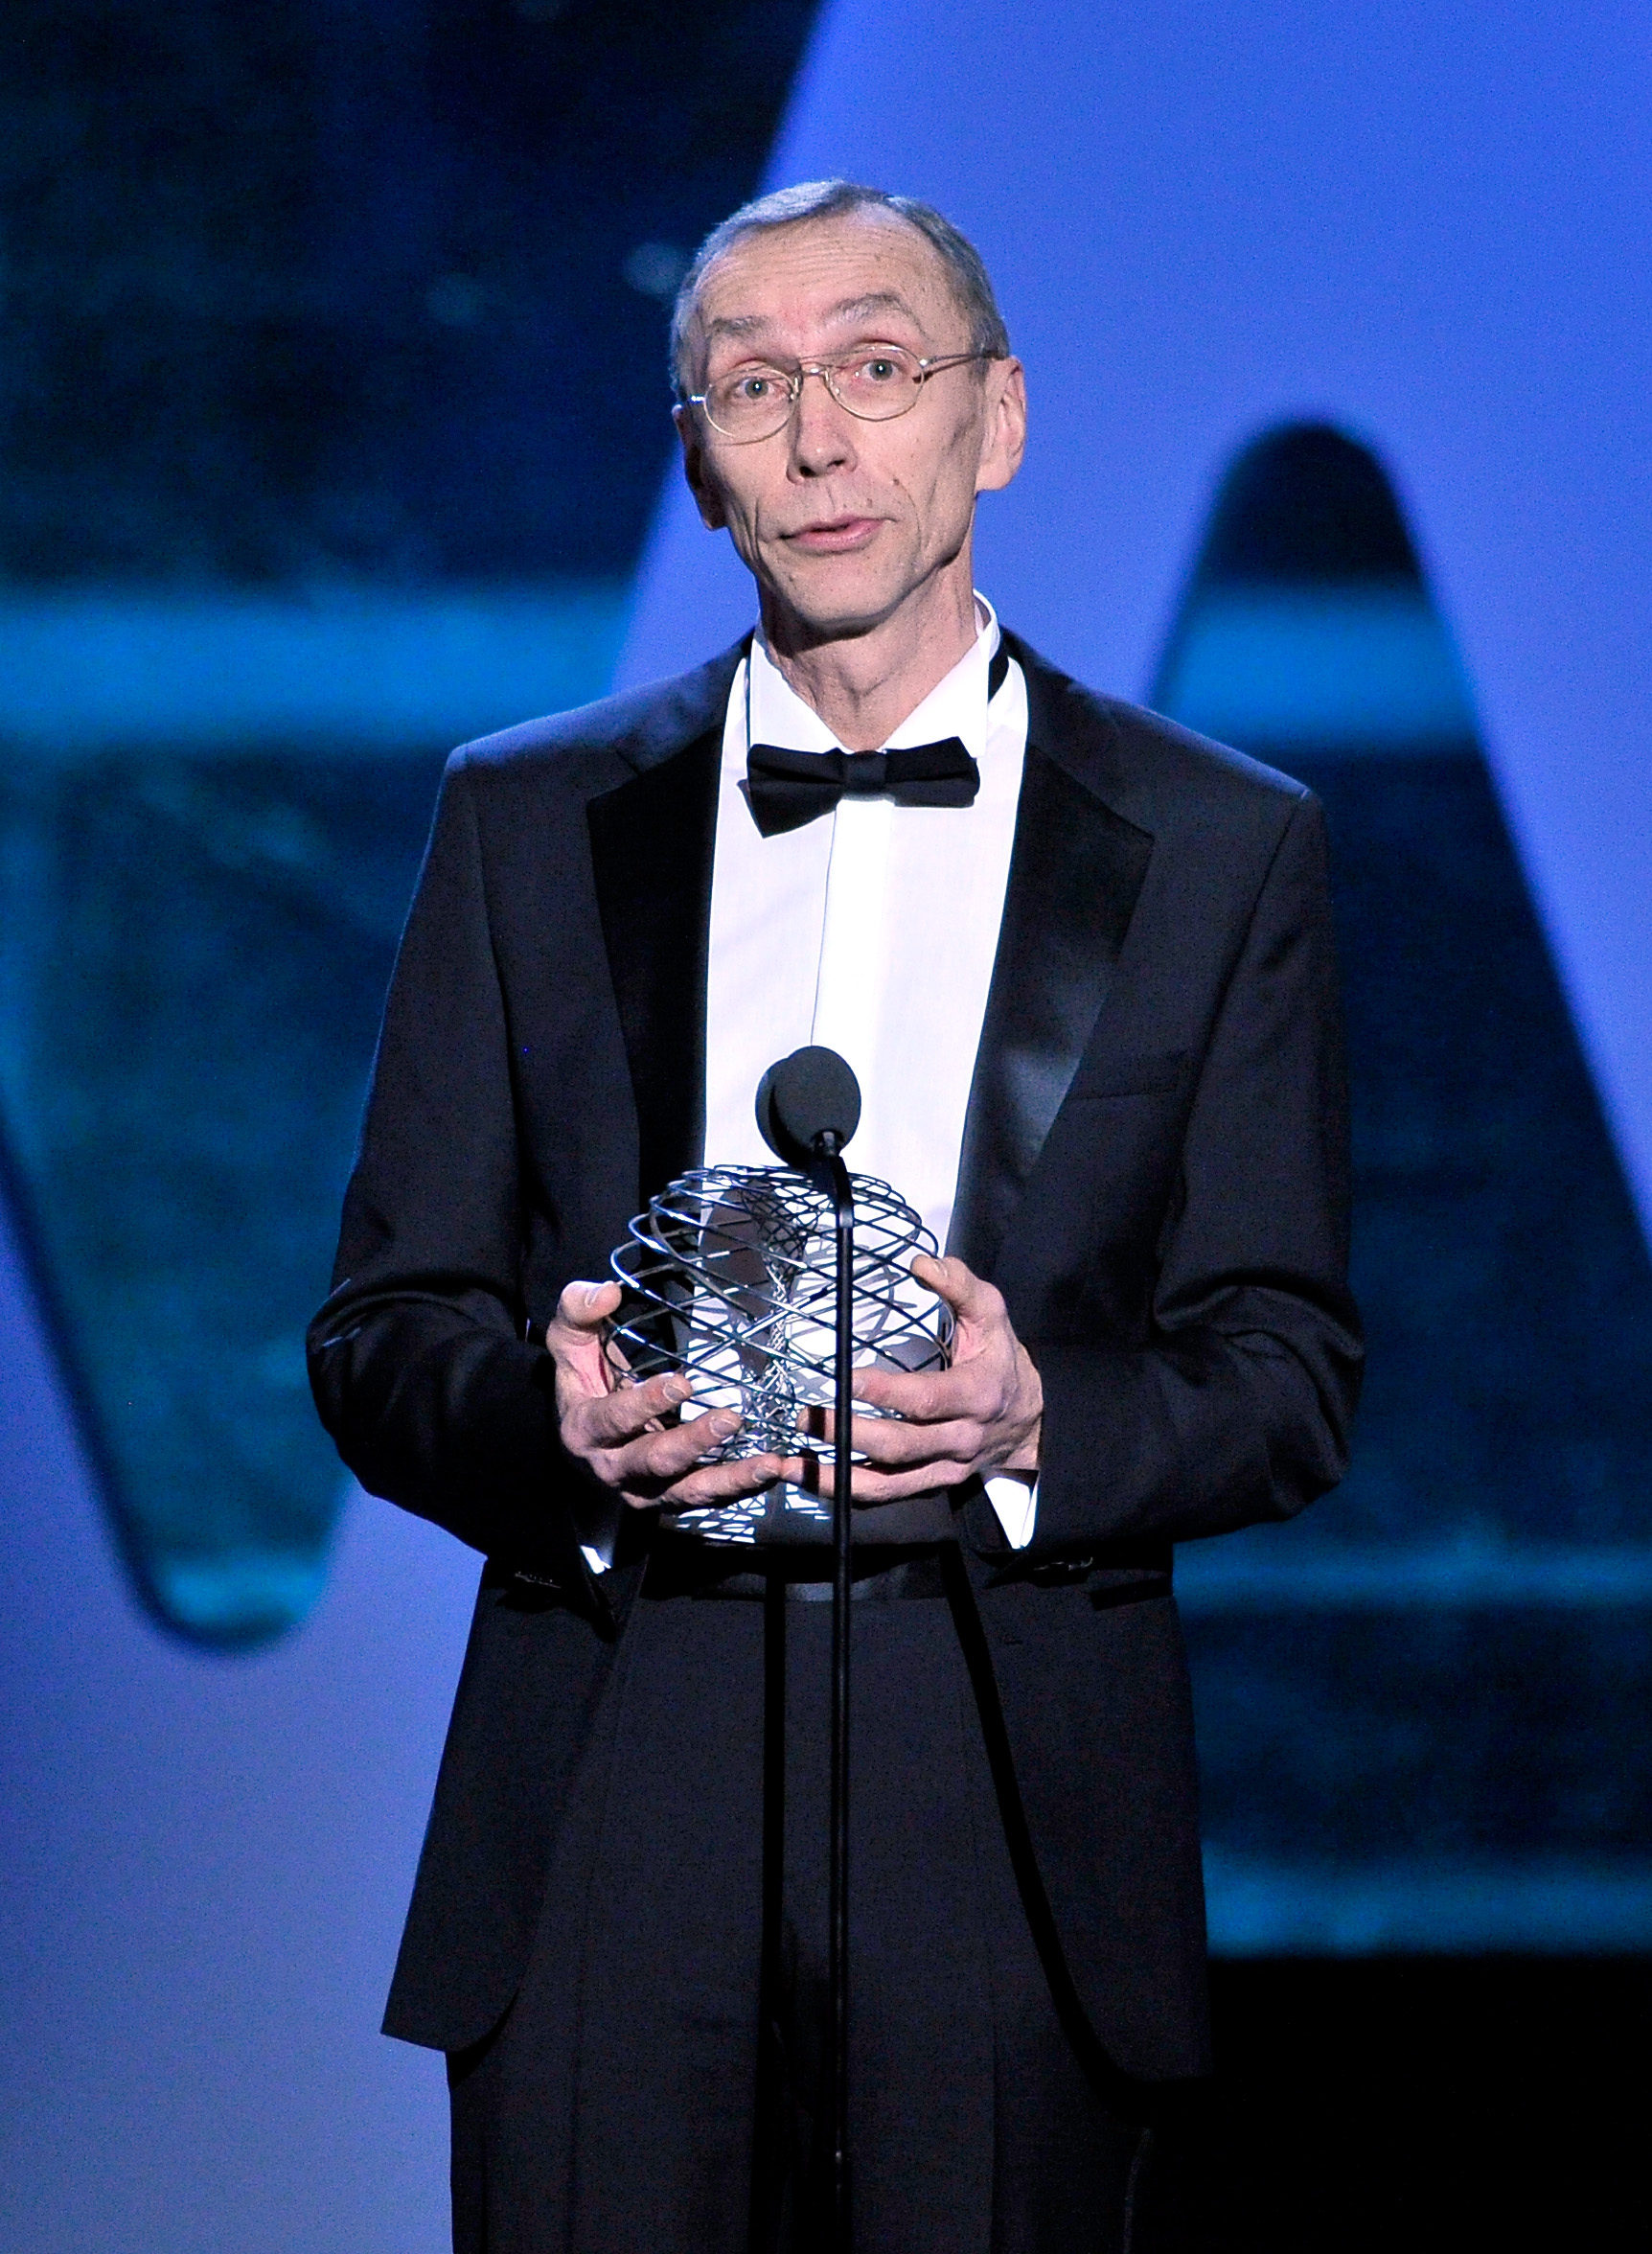 Svante Paabo accepts the 2016 Breakthrough Prize in Life Sciences at the 2016 Breakthrough Prize Ceremony on November 8, 2015 in Mountain View, California. (Steve Jennings—2015 Getty Images)